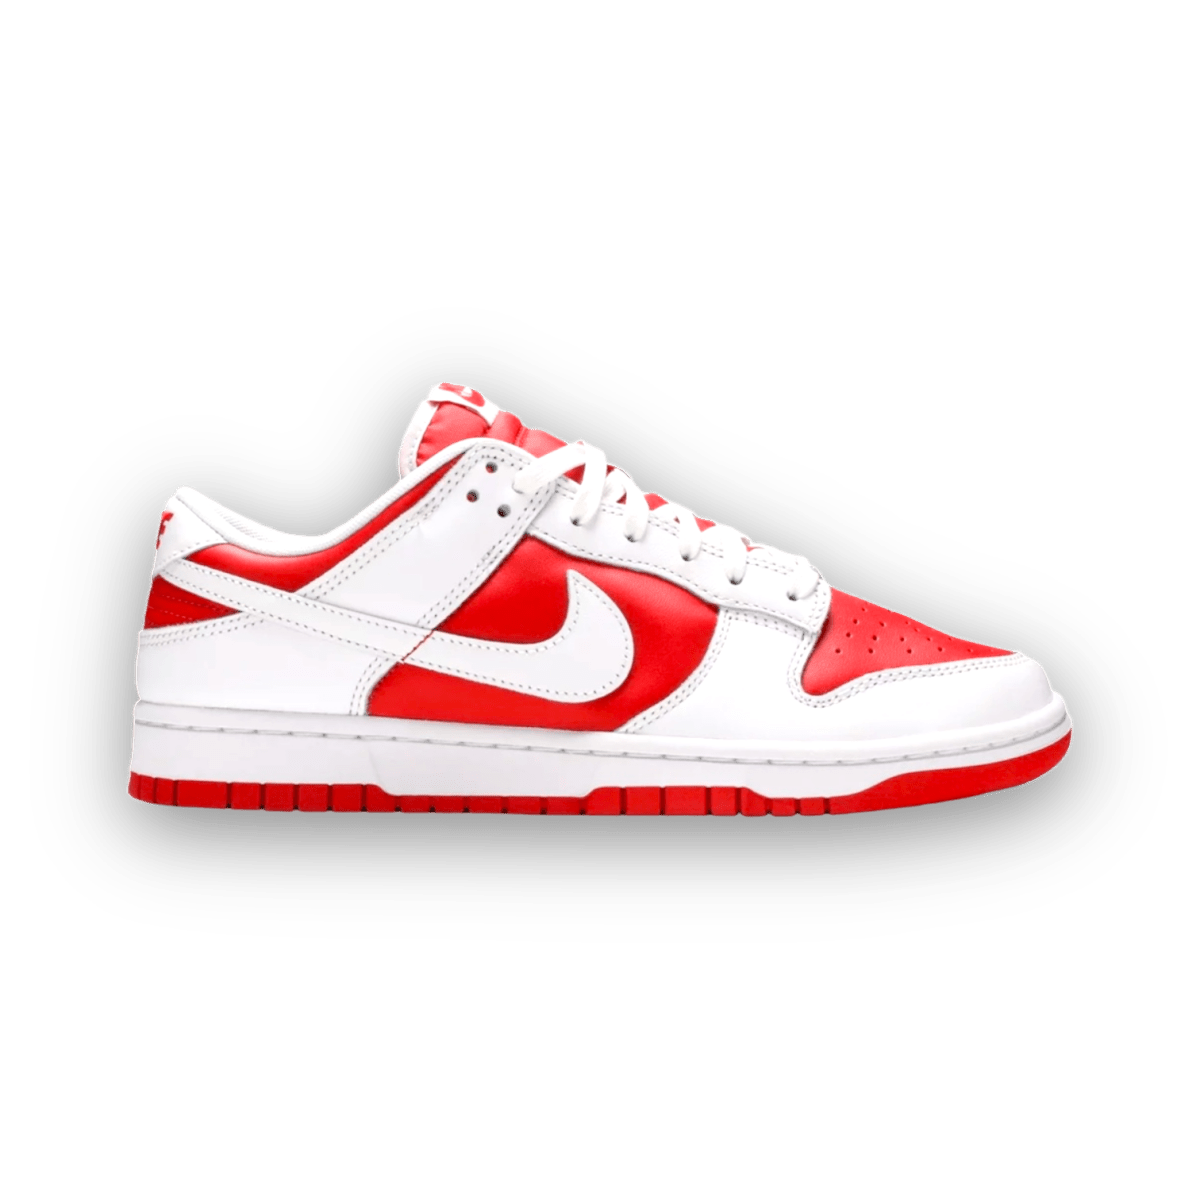 Dunk Low Championship Red - Low Sneaker - Dunks - Jawns on Fire - sneakers